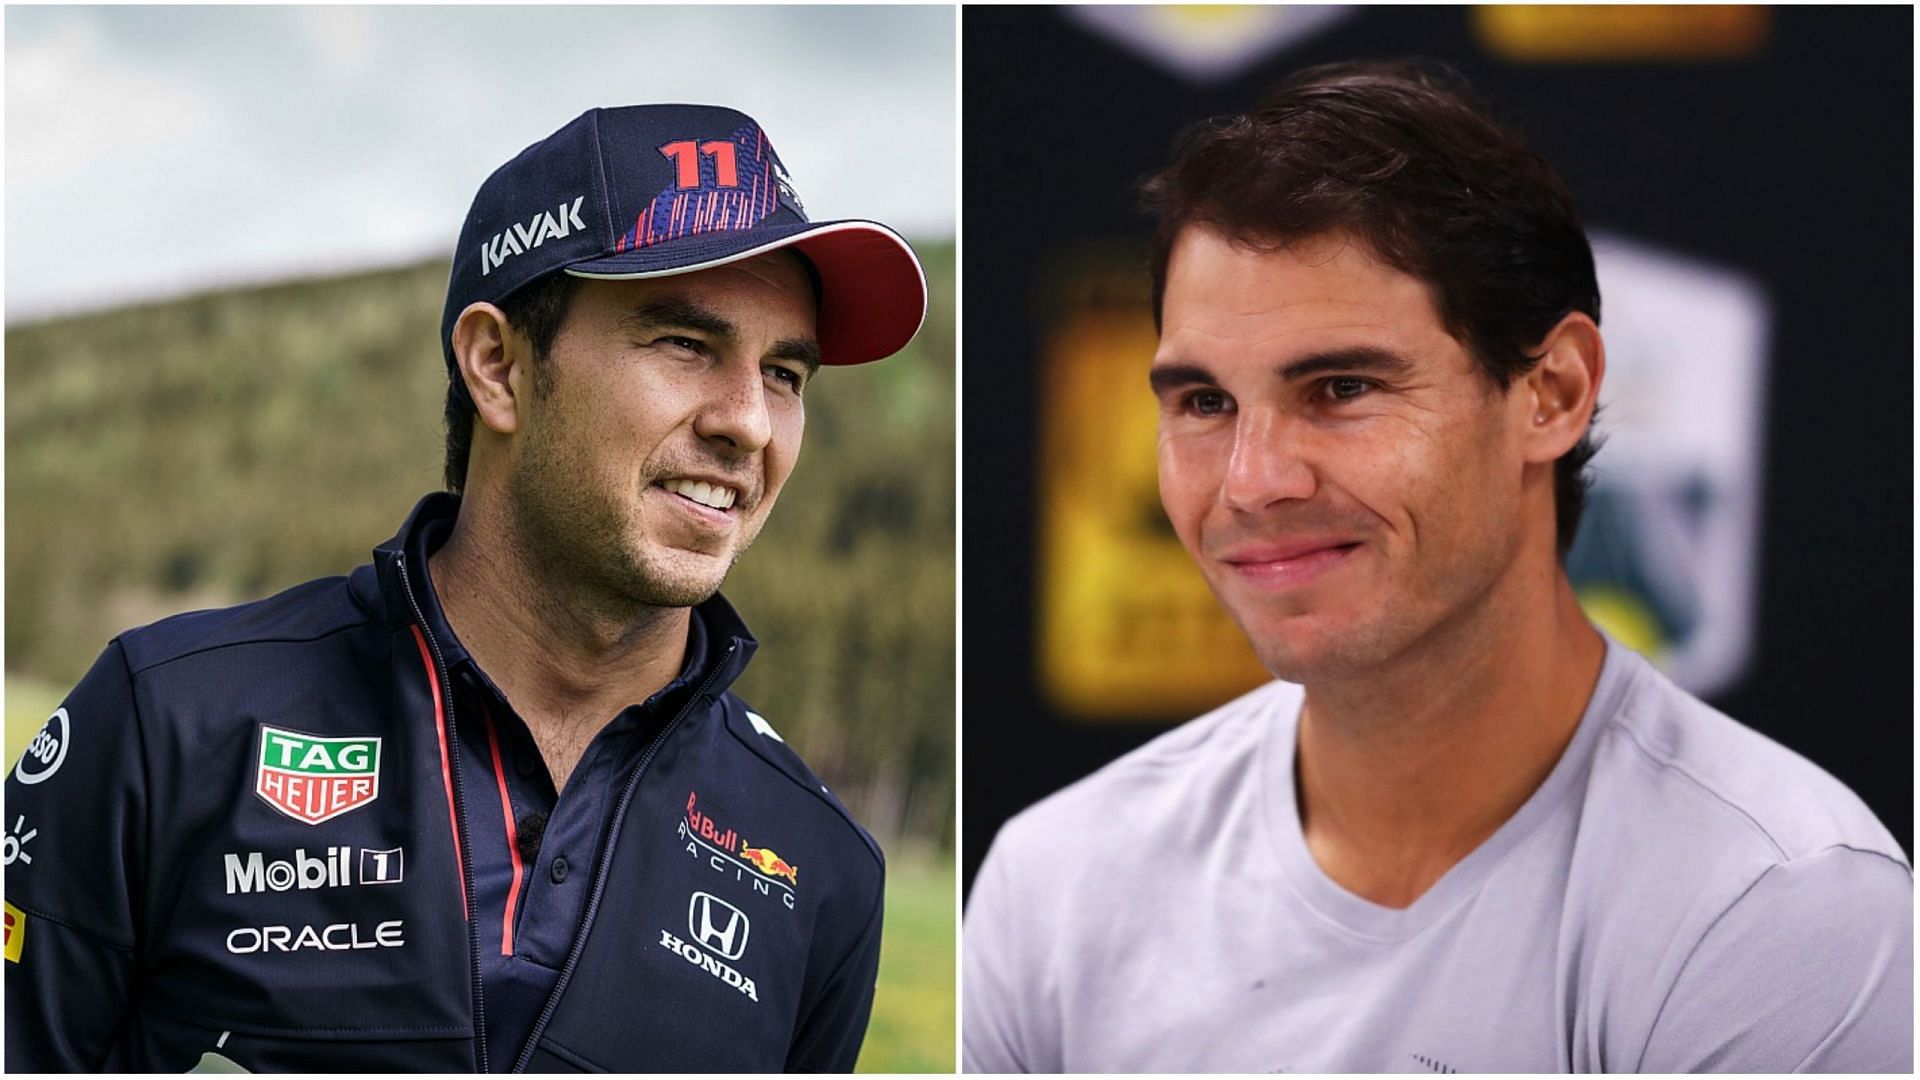 Sergio Perez (L) has now challenged Rafael Nadal (R) in a race away from the asphalt